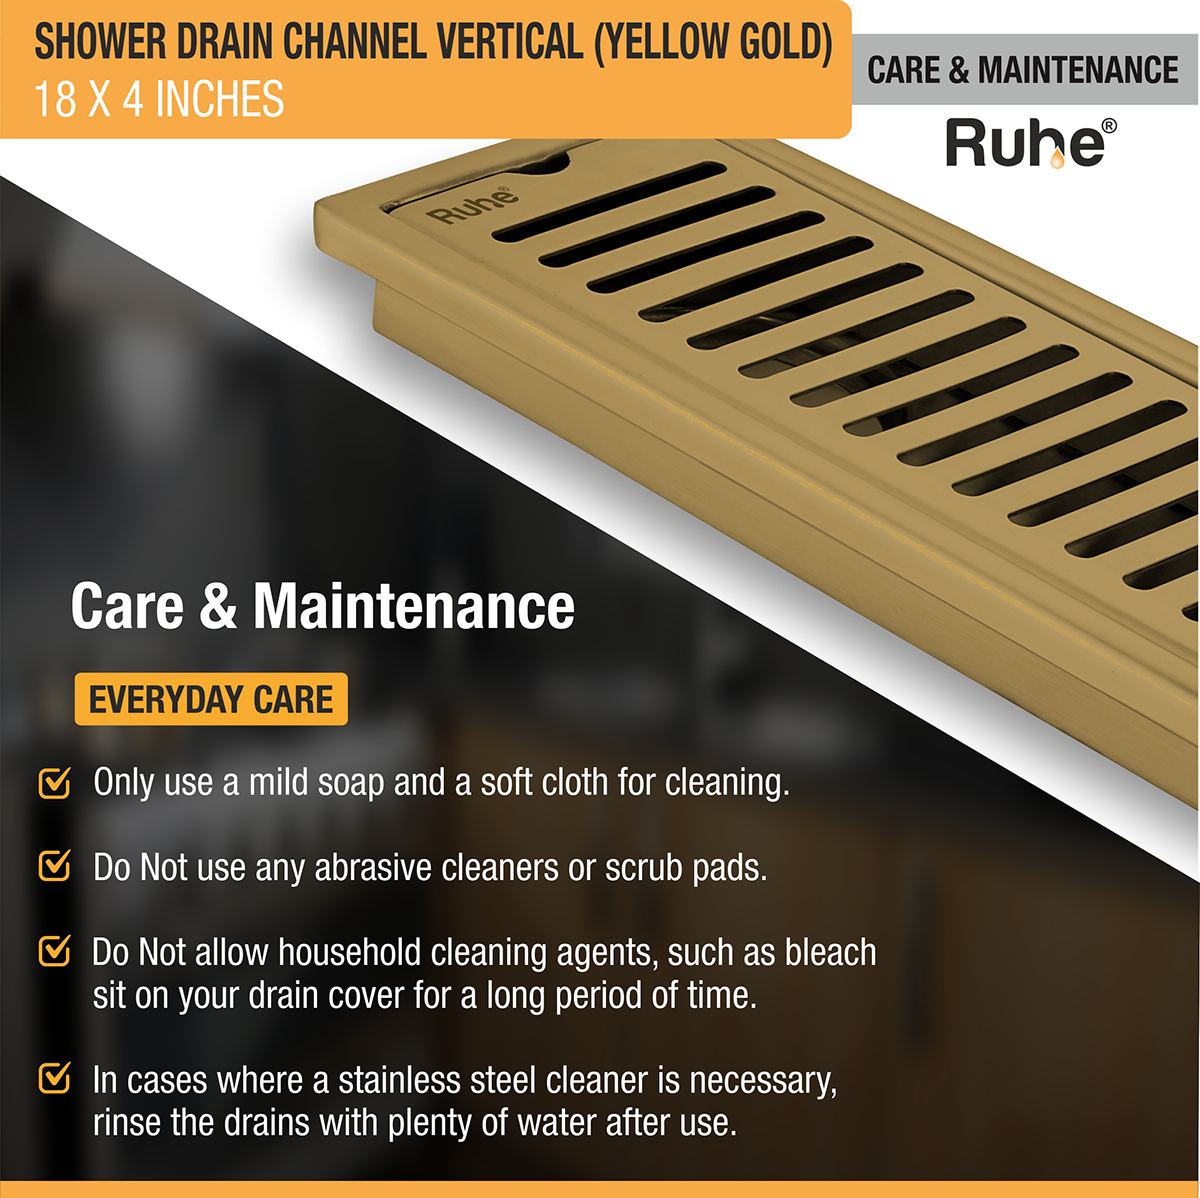 Vertical Shower Drain Channel (18 x 4 Inches) YELLOW GOLD care and maintenance